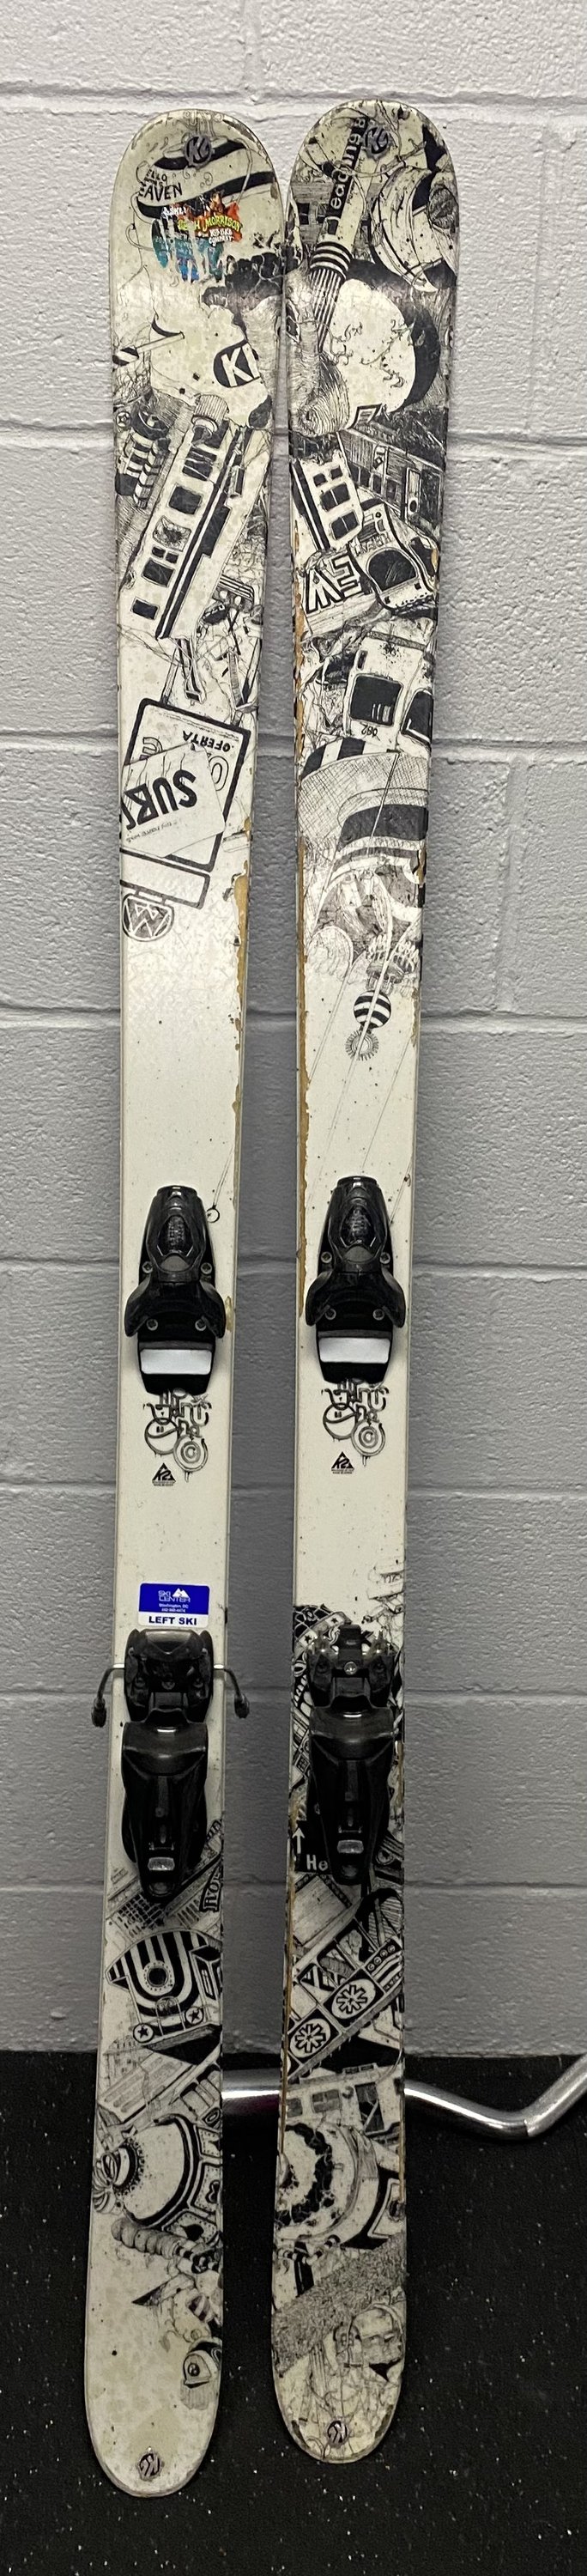 Anyone know anything about these skis. They r k2